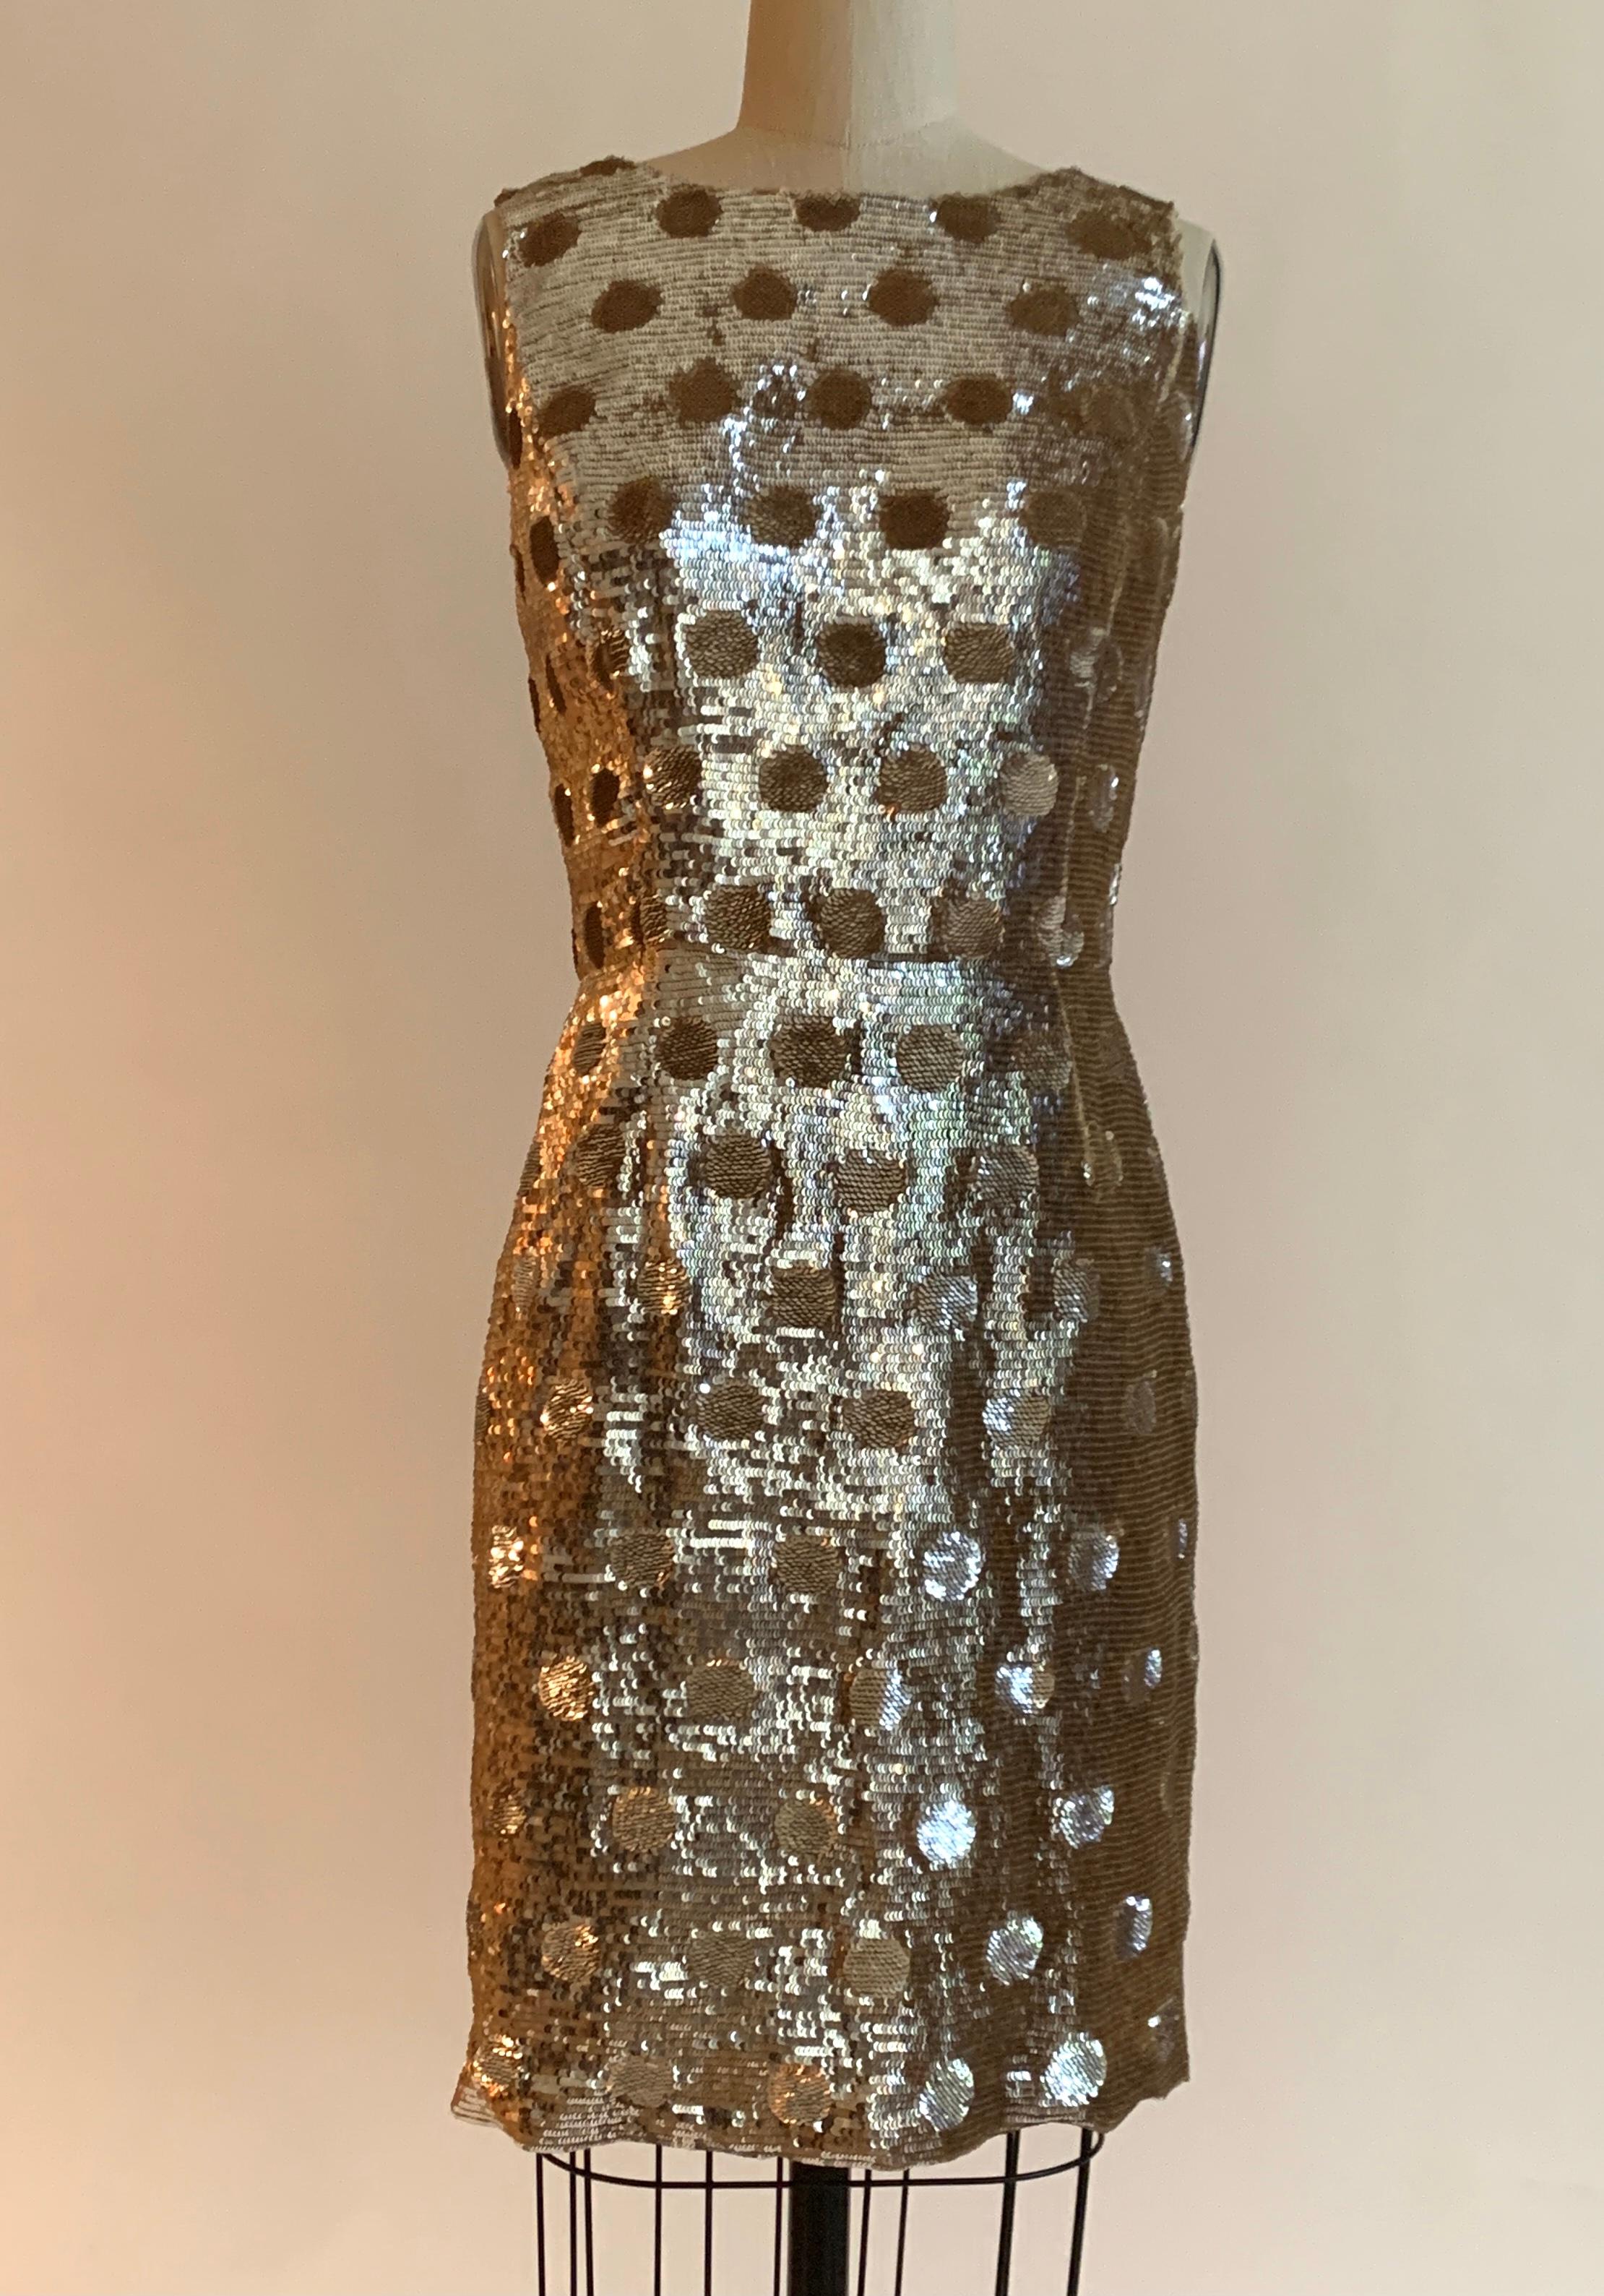 Oscar de la Renta metallic gold sequin fitted sleeveless party dress. The sequins switch direction in spots, forming a polka dot pattern. The perfect holiday dress! Back zip and hook and eye. 

100% silk.

Made in USA.

Size US 4, see